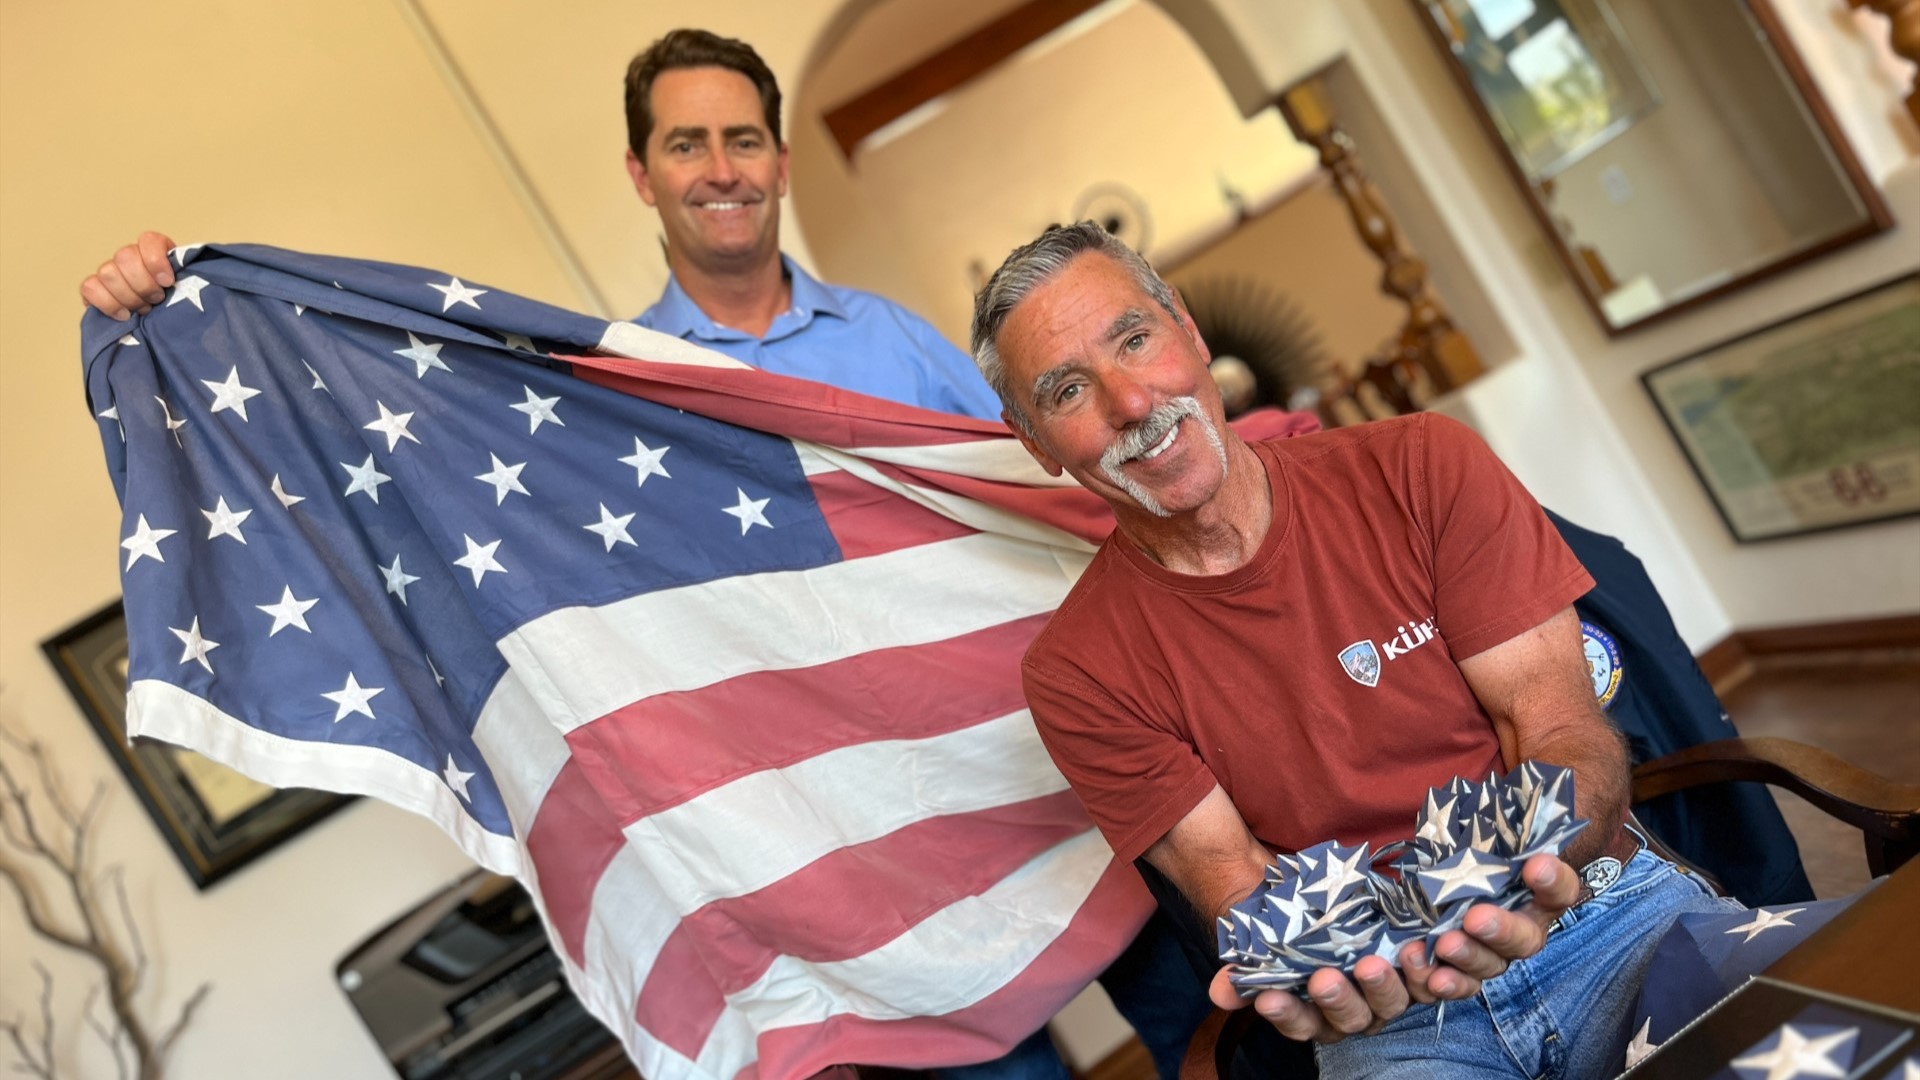 Dee Folse decommissions American flags from Miramar National Cemetery and gives away 'Stars' to spread patriotism.